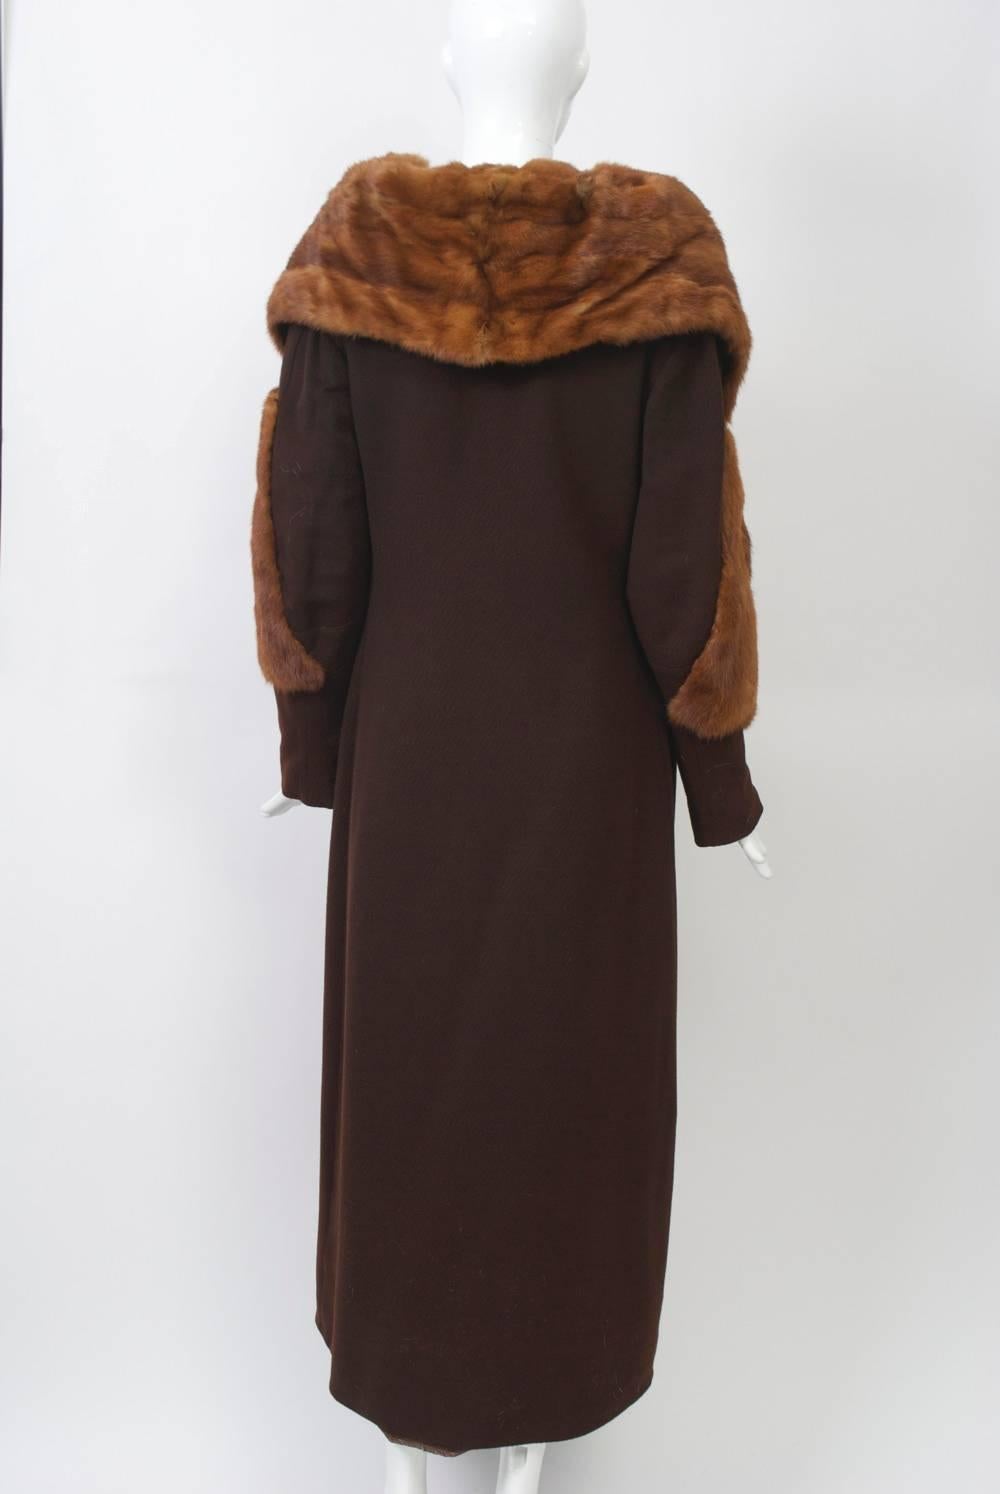 Brown wool 1930s long coat with golden mink trim on oversized stand-up collar and on sleeves. Asymmetrical closure with brown plastic buttons and interior closure. Narrow, slim cut, brown satin lining.